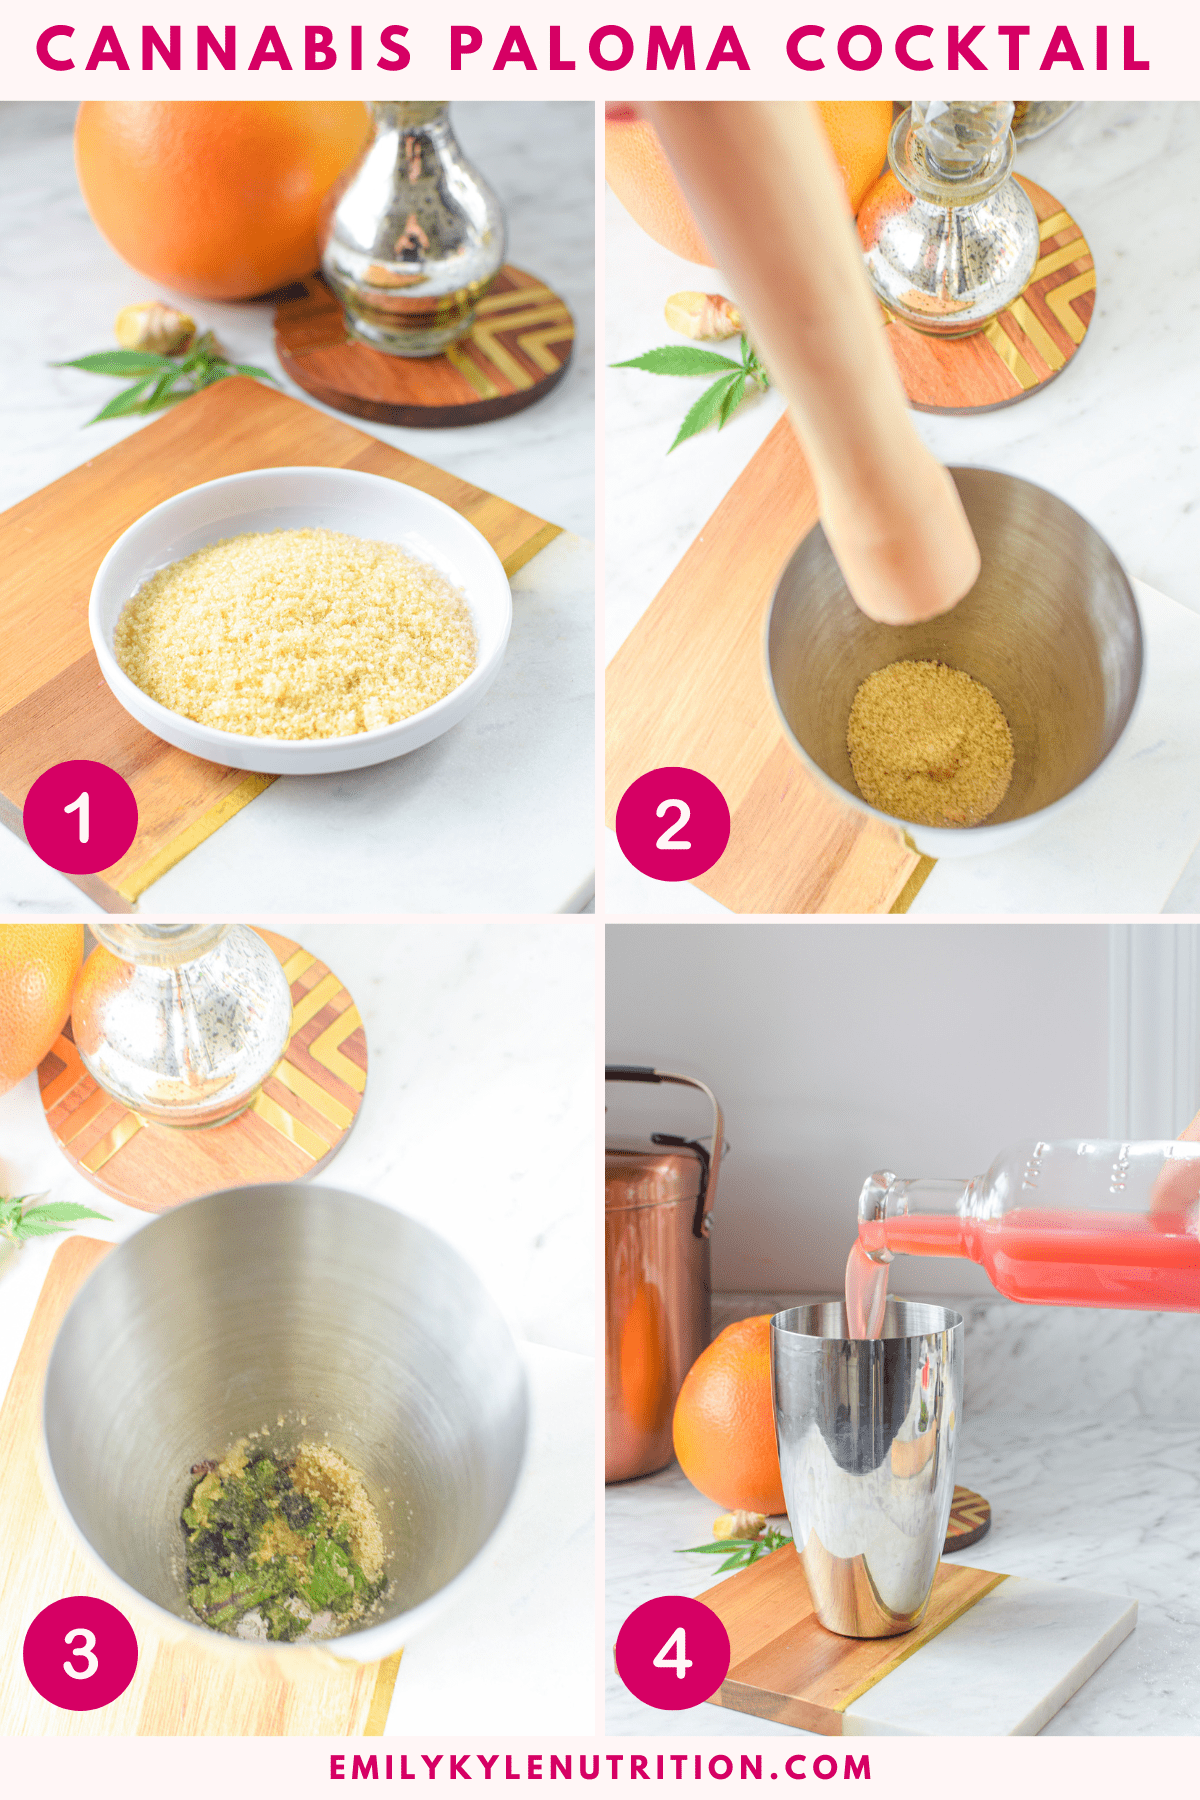 A four step image collage showing how to make a cannabis Paloma cocktail.